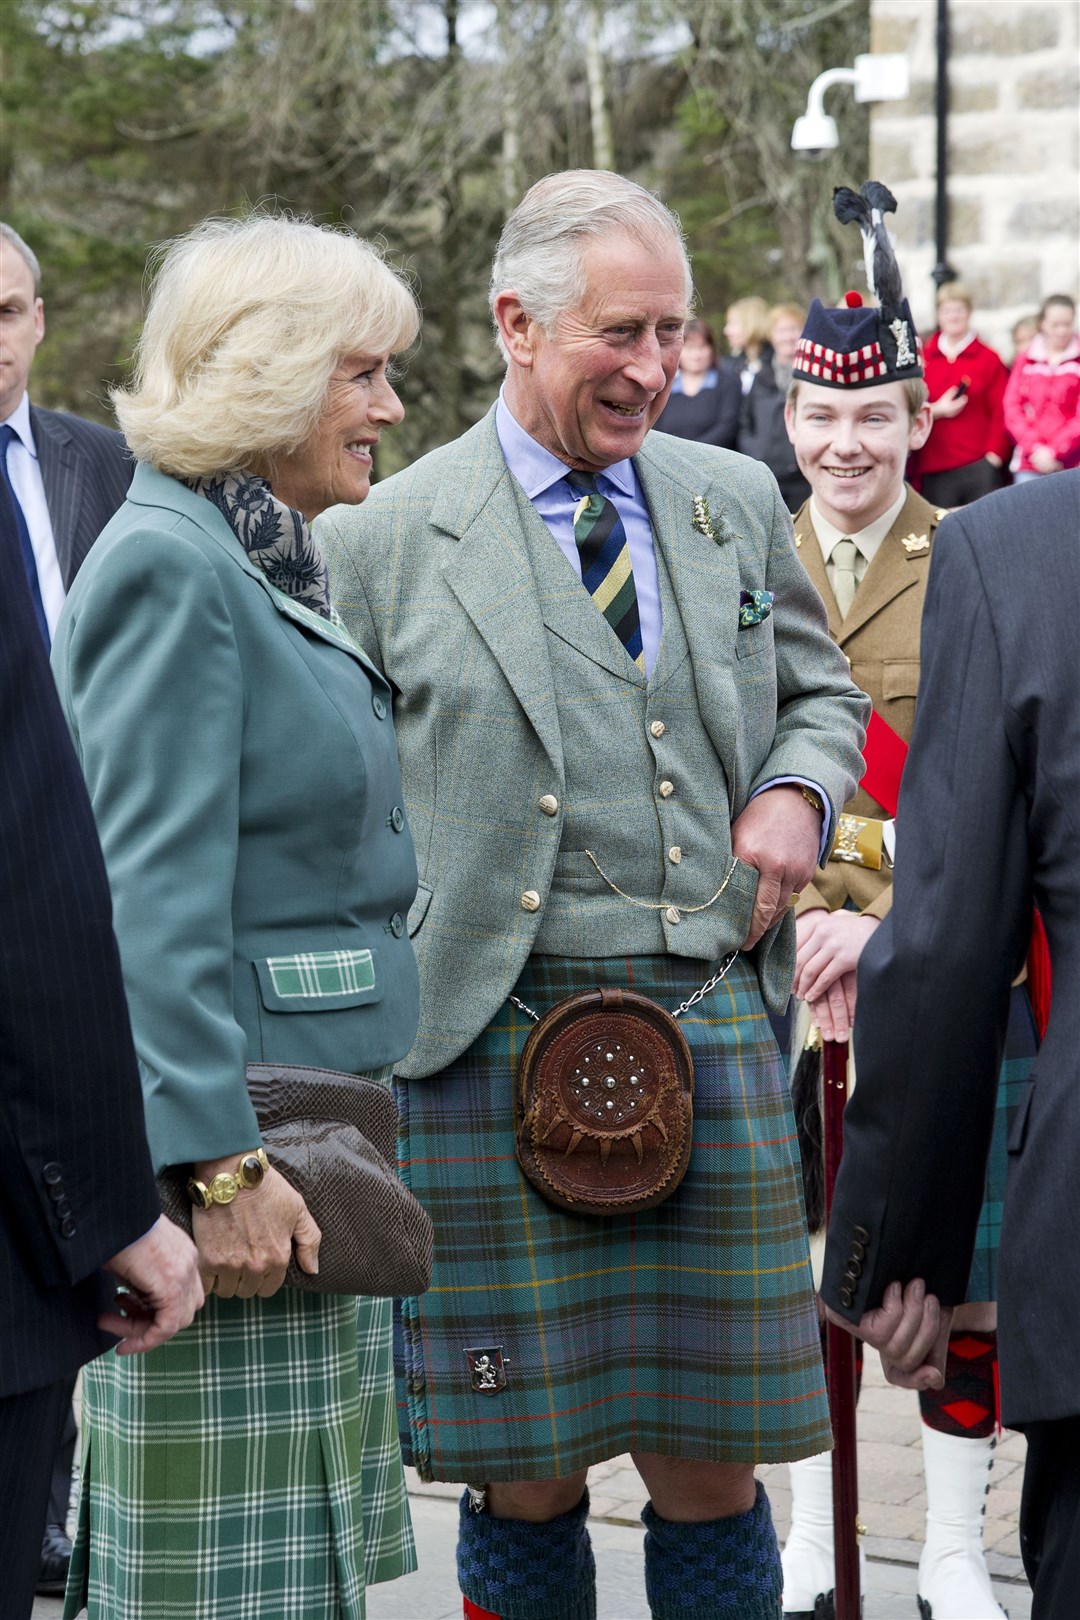 King Charles and Camilla visiting Walkers Shortbread in 2015.